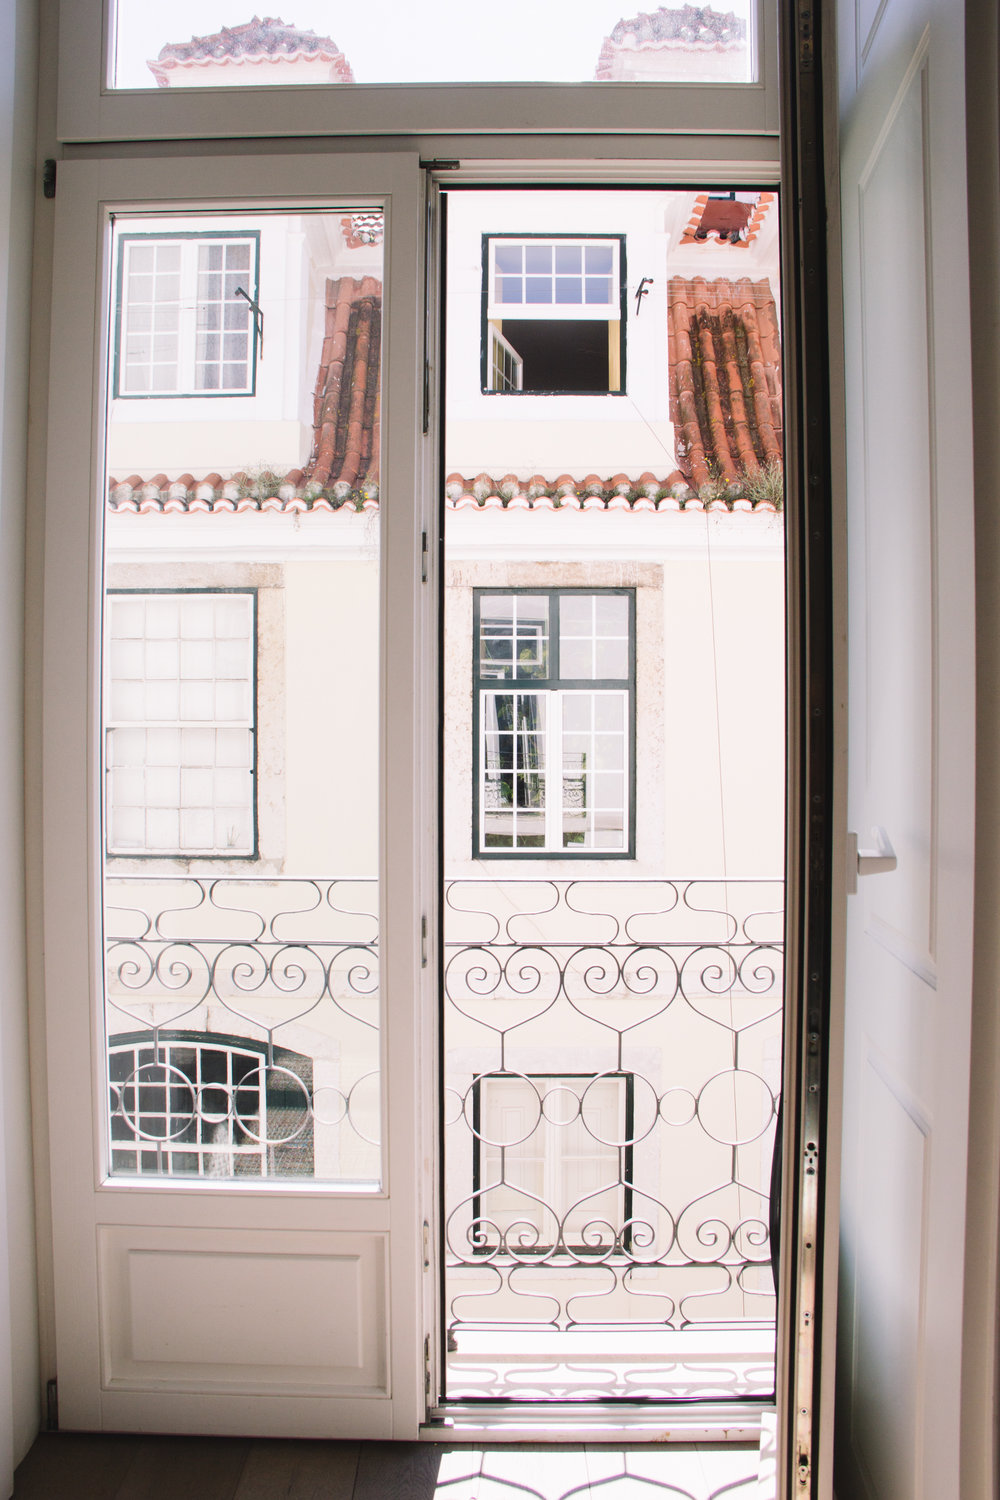 What a city dream to have french doors looking out on historic streets